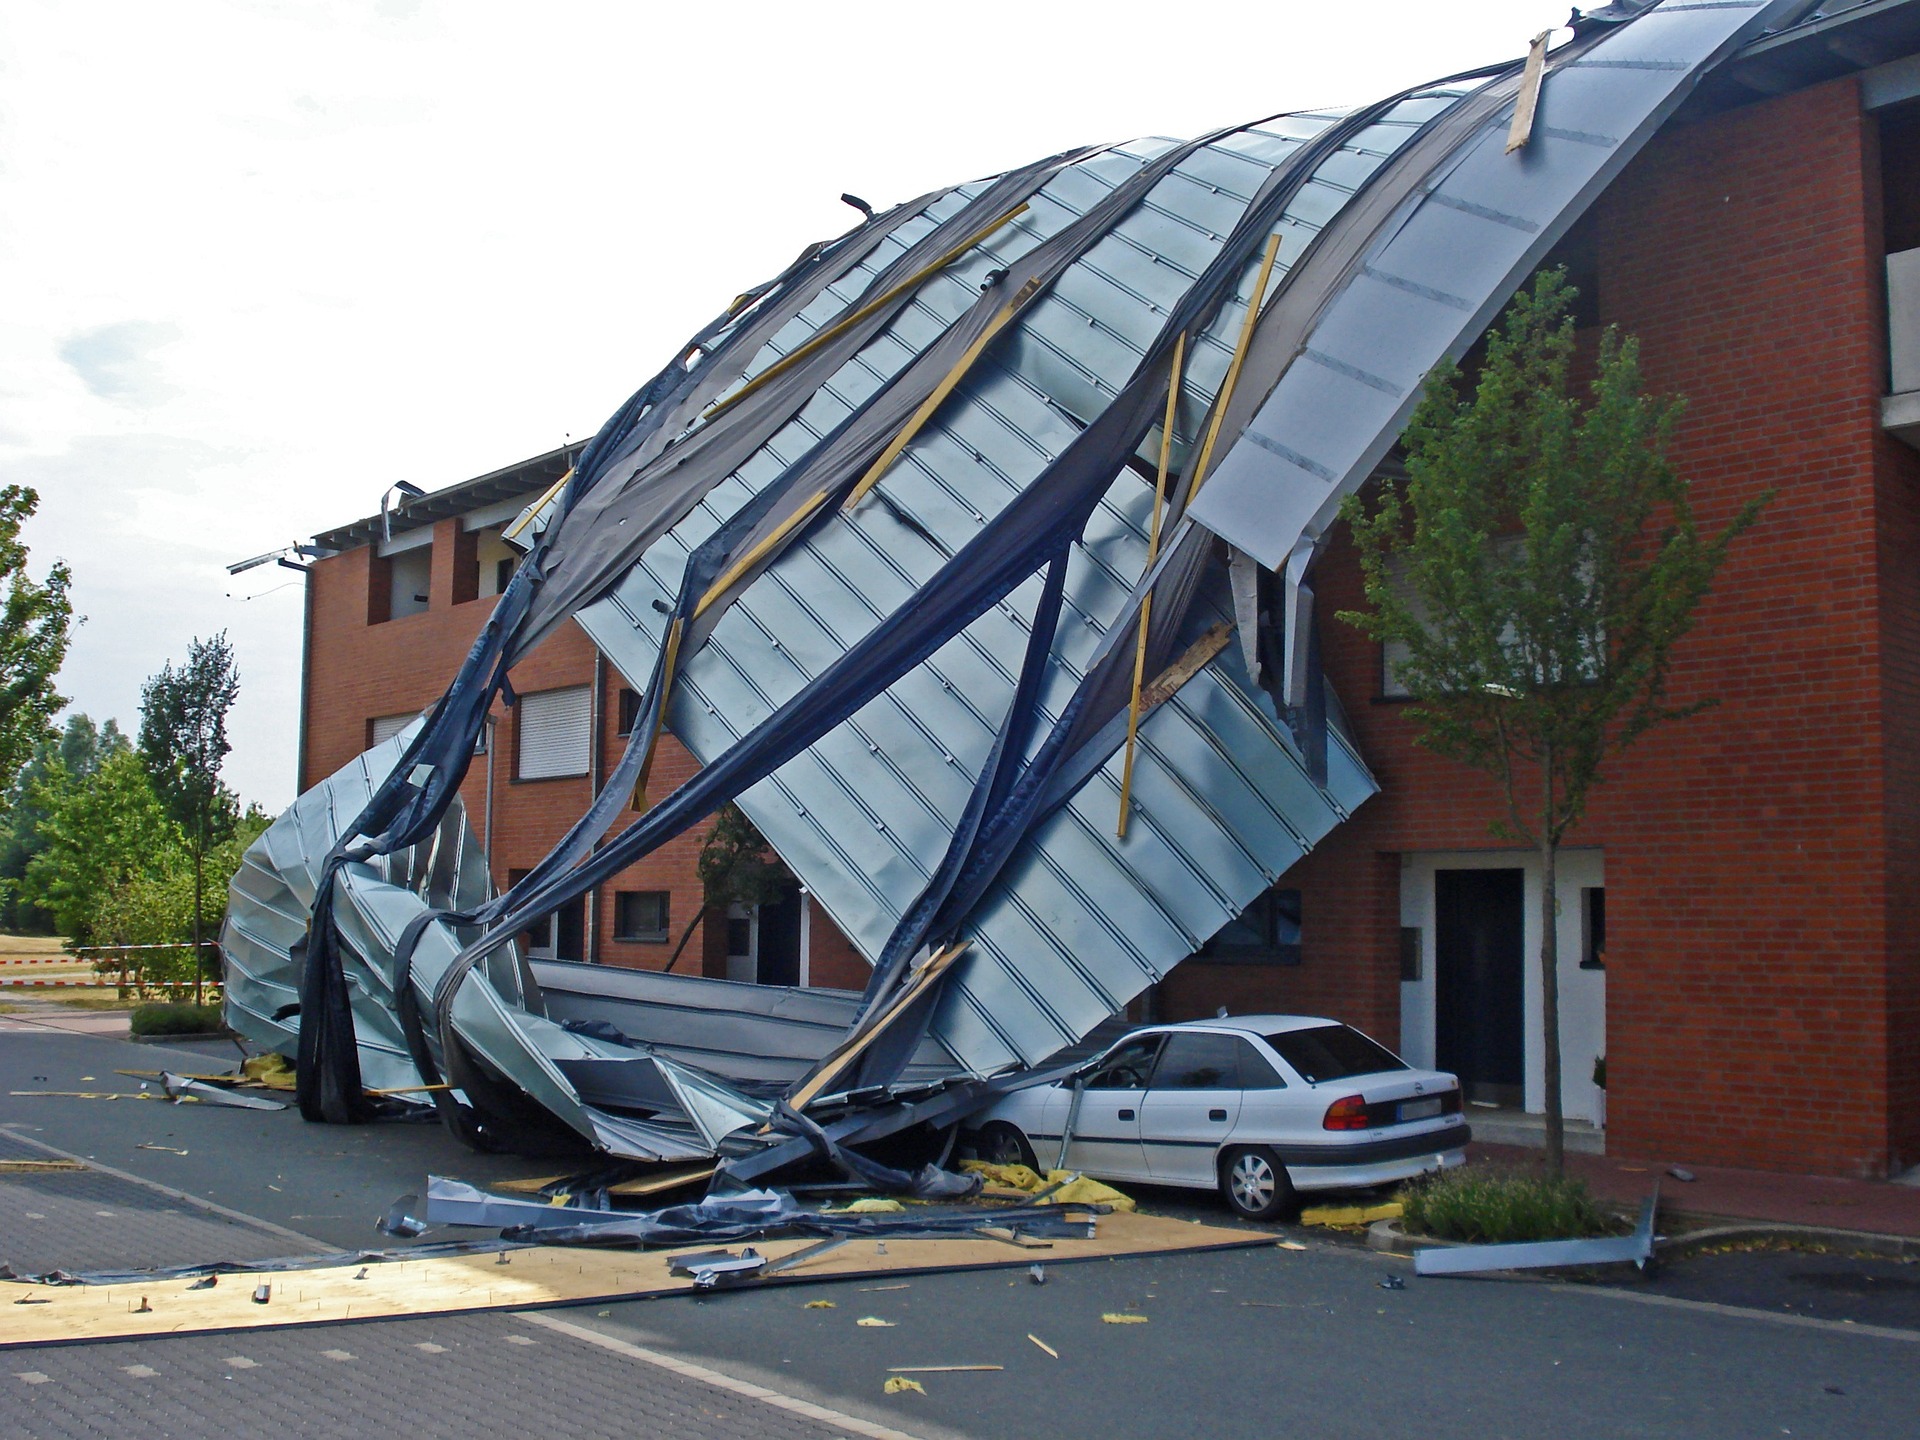 A commercial building that had the roof collapse on top of a car